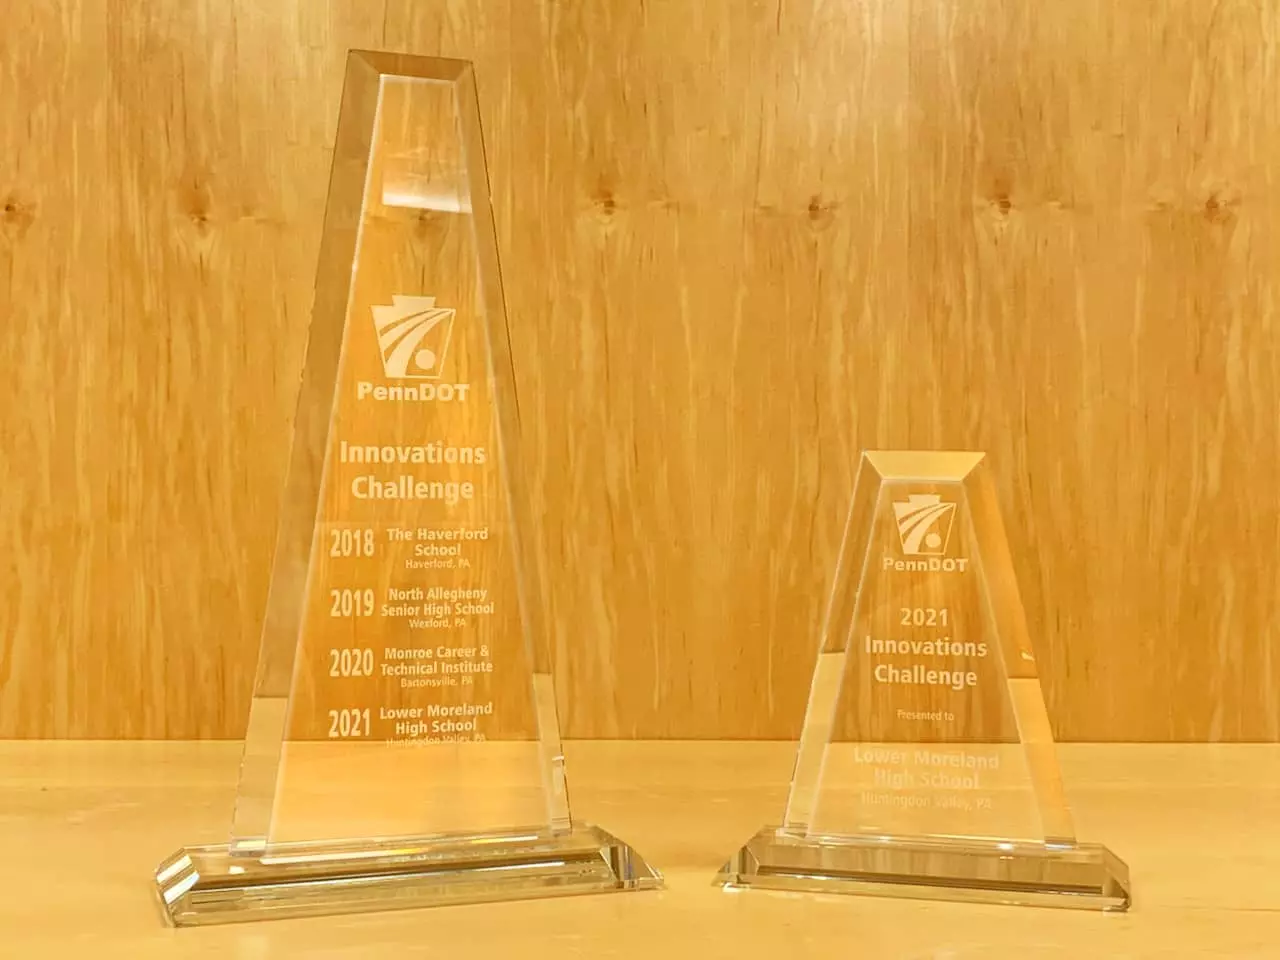 Innovations Challenge traveling trophy showing past winners, next to the Lower Moreland High School 2021 Innovations Challenge trophy.